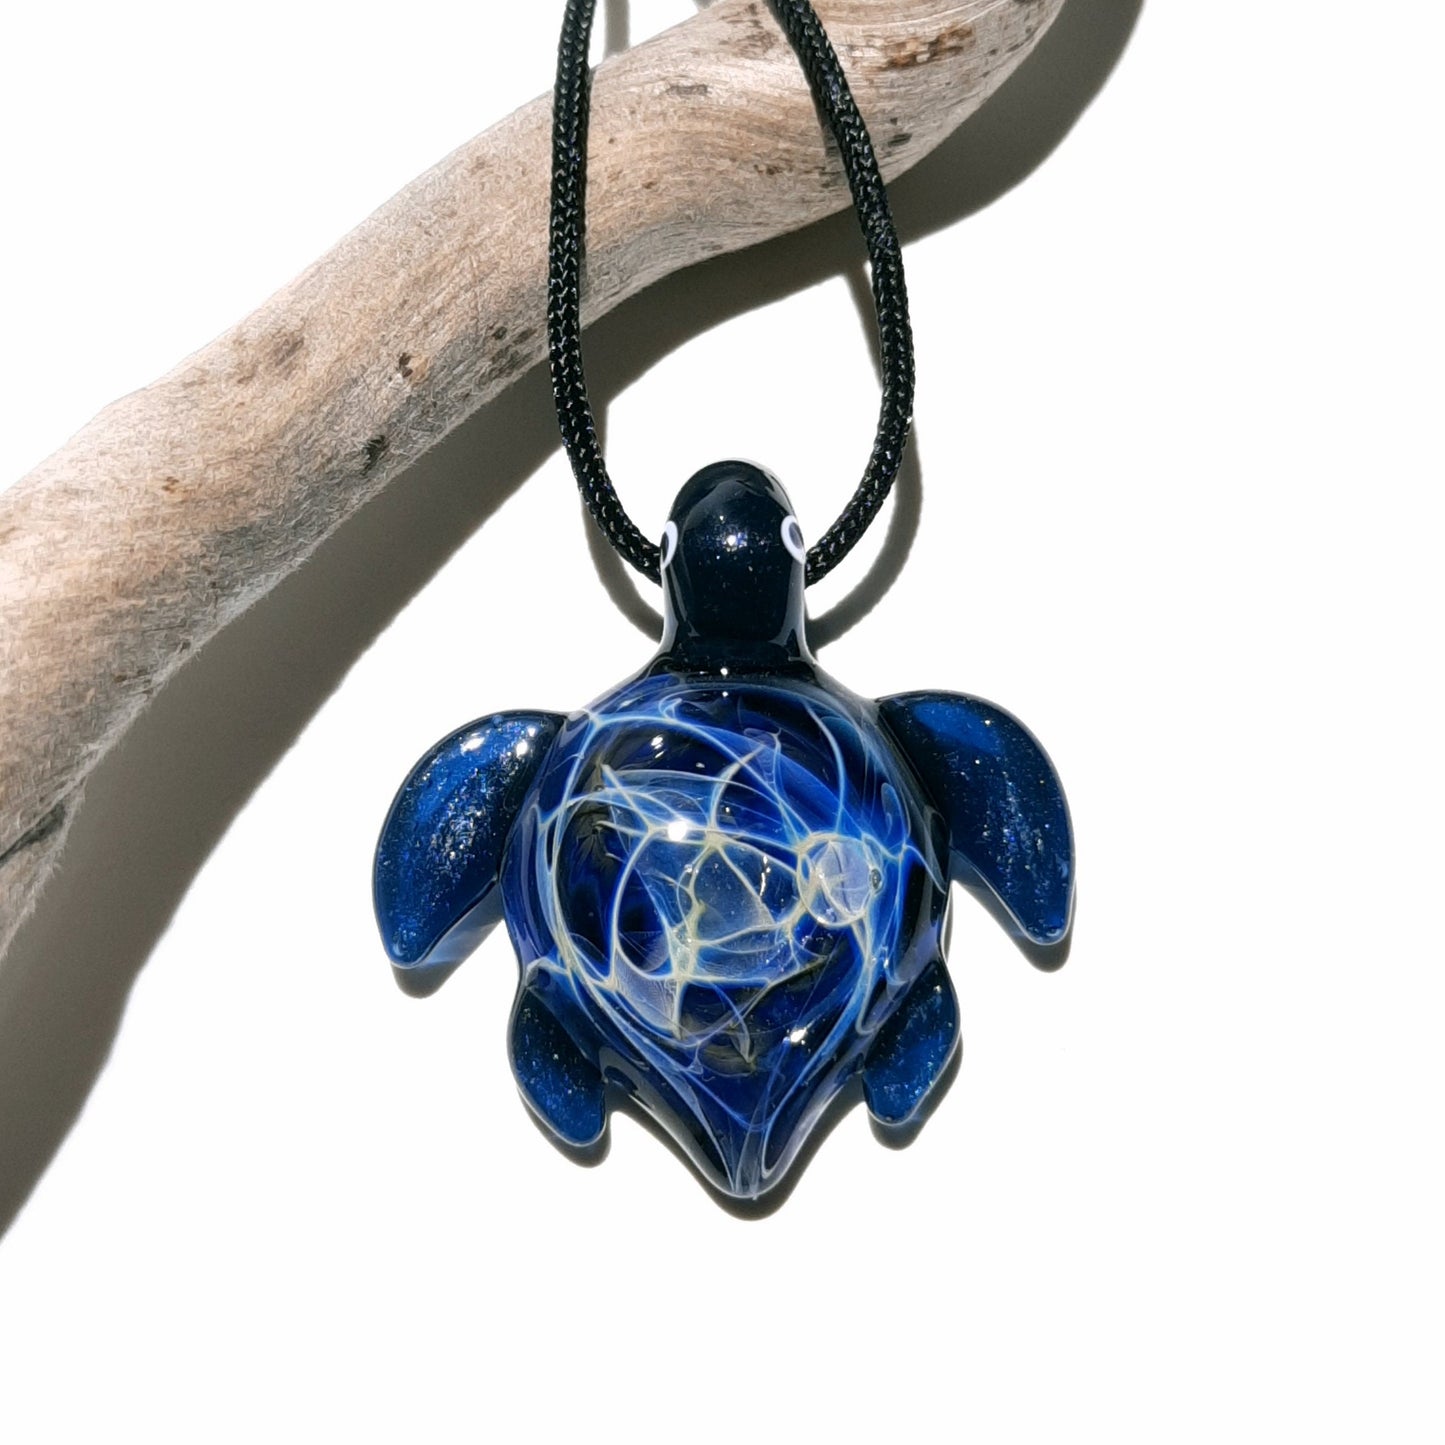 Glass Turtle - Baby Midnight Starburst Turtle Pendant - Glass Pendant - Glass Jewelry - Blown Glass - Artist Signed - Details of Silver